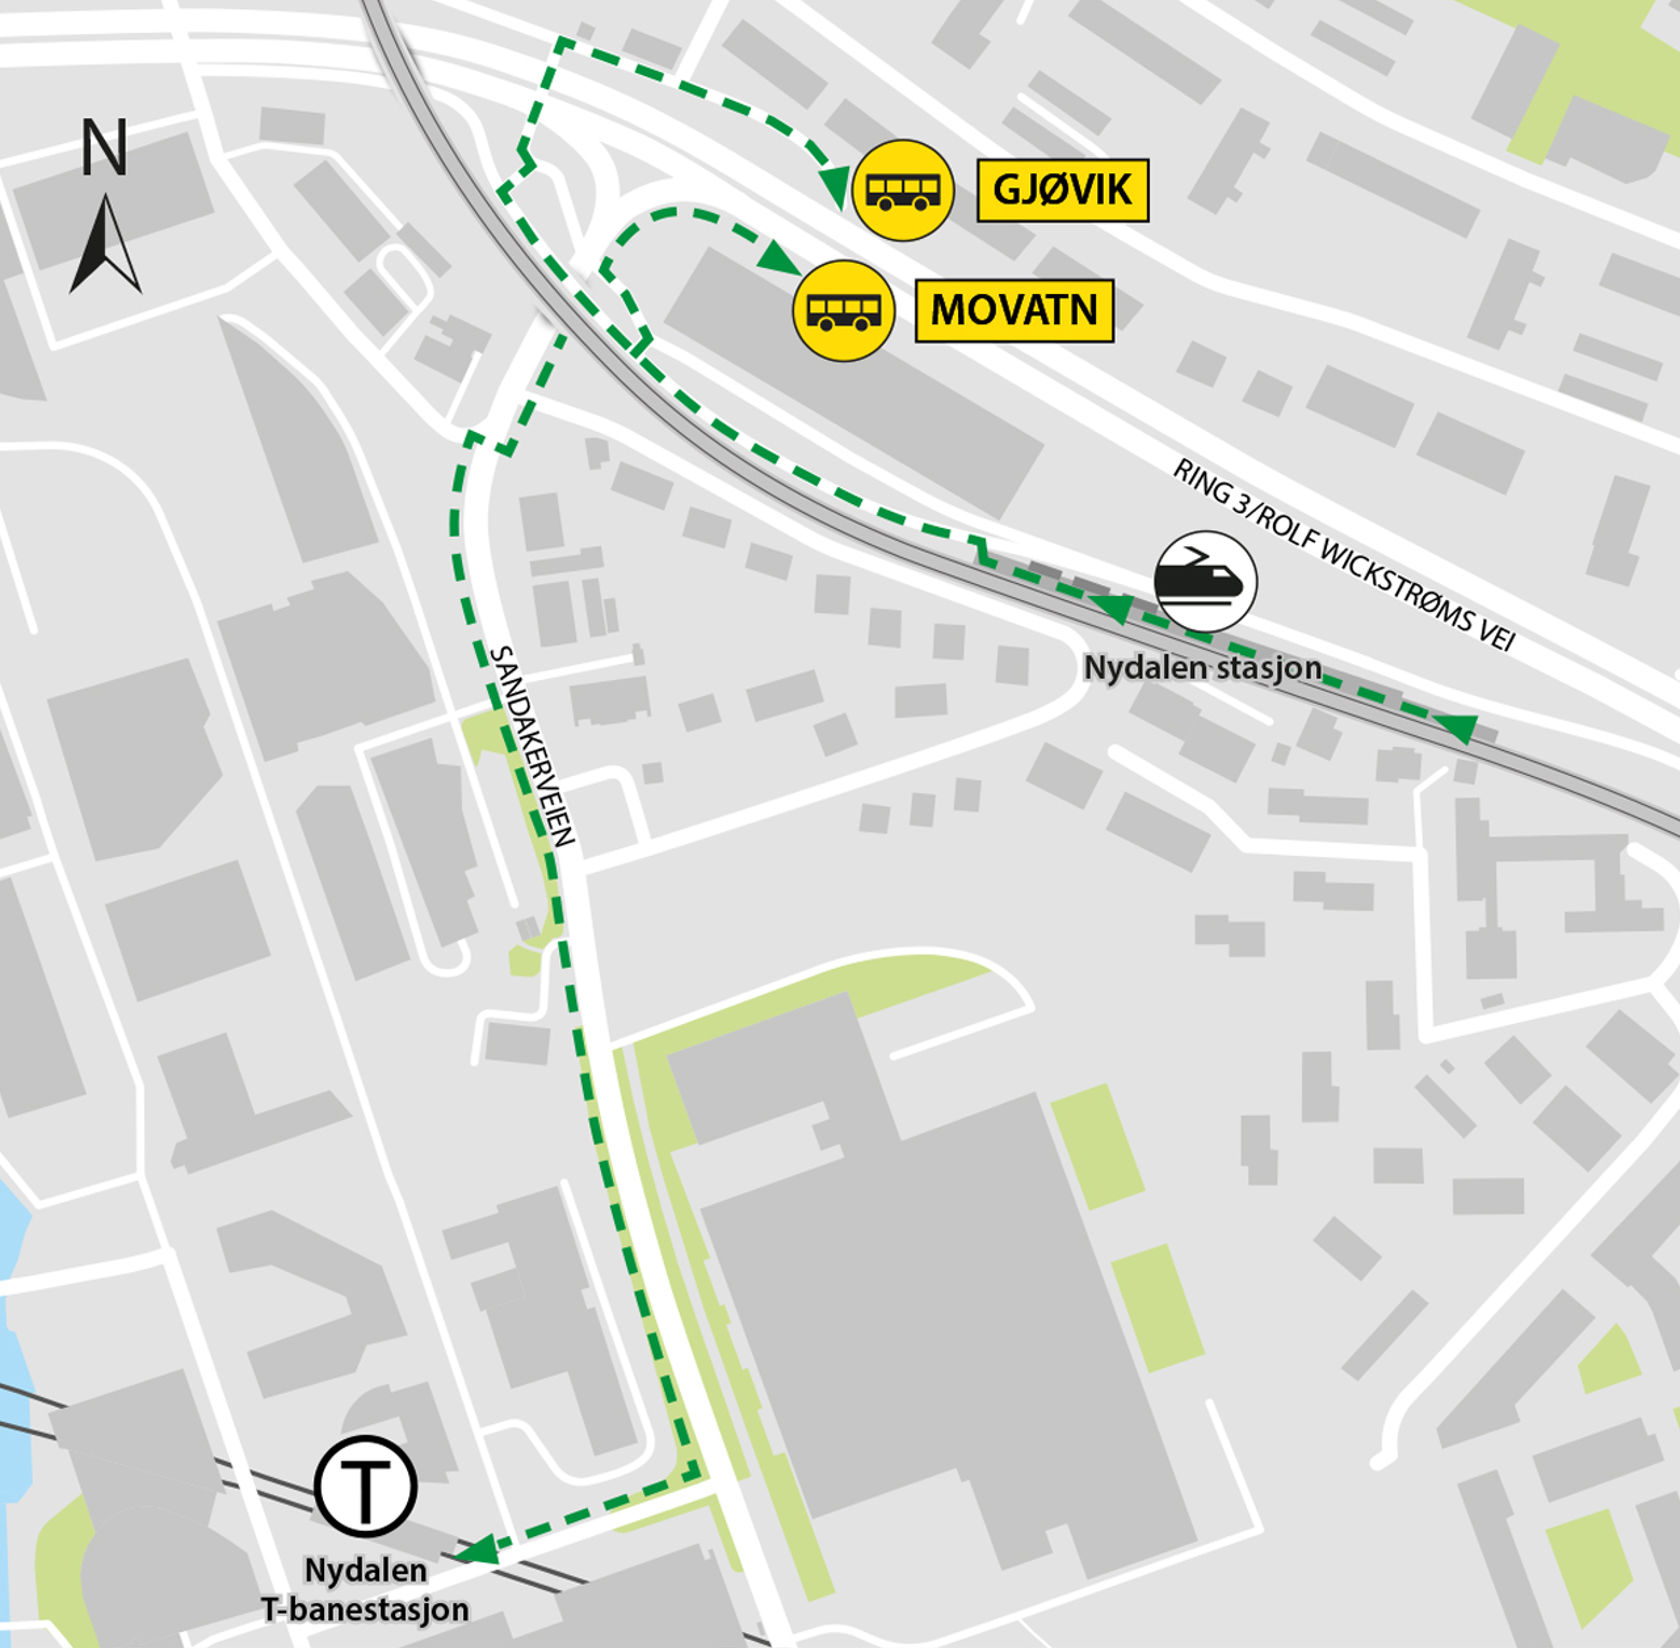 Map shows rail replacement departs from Nydalen station bus stops in Rolf Wickstrøms vei